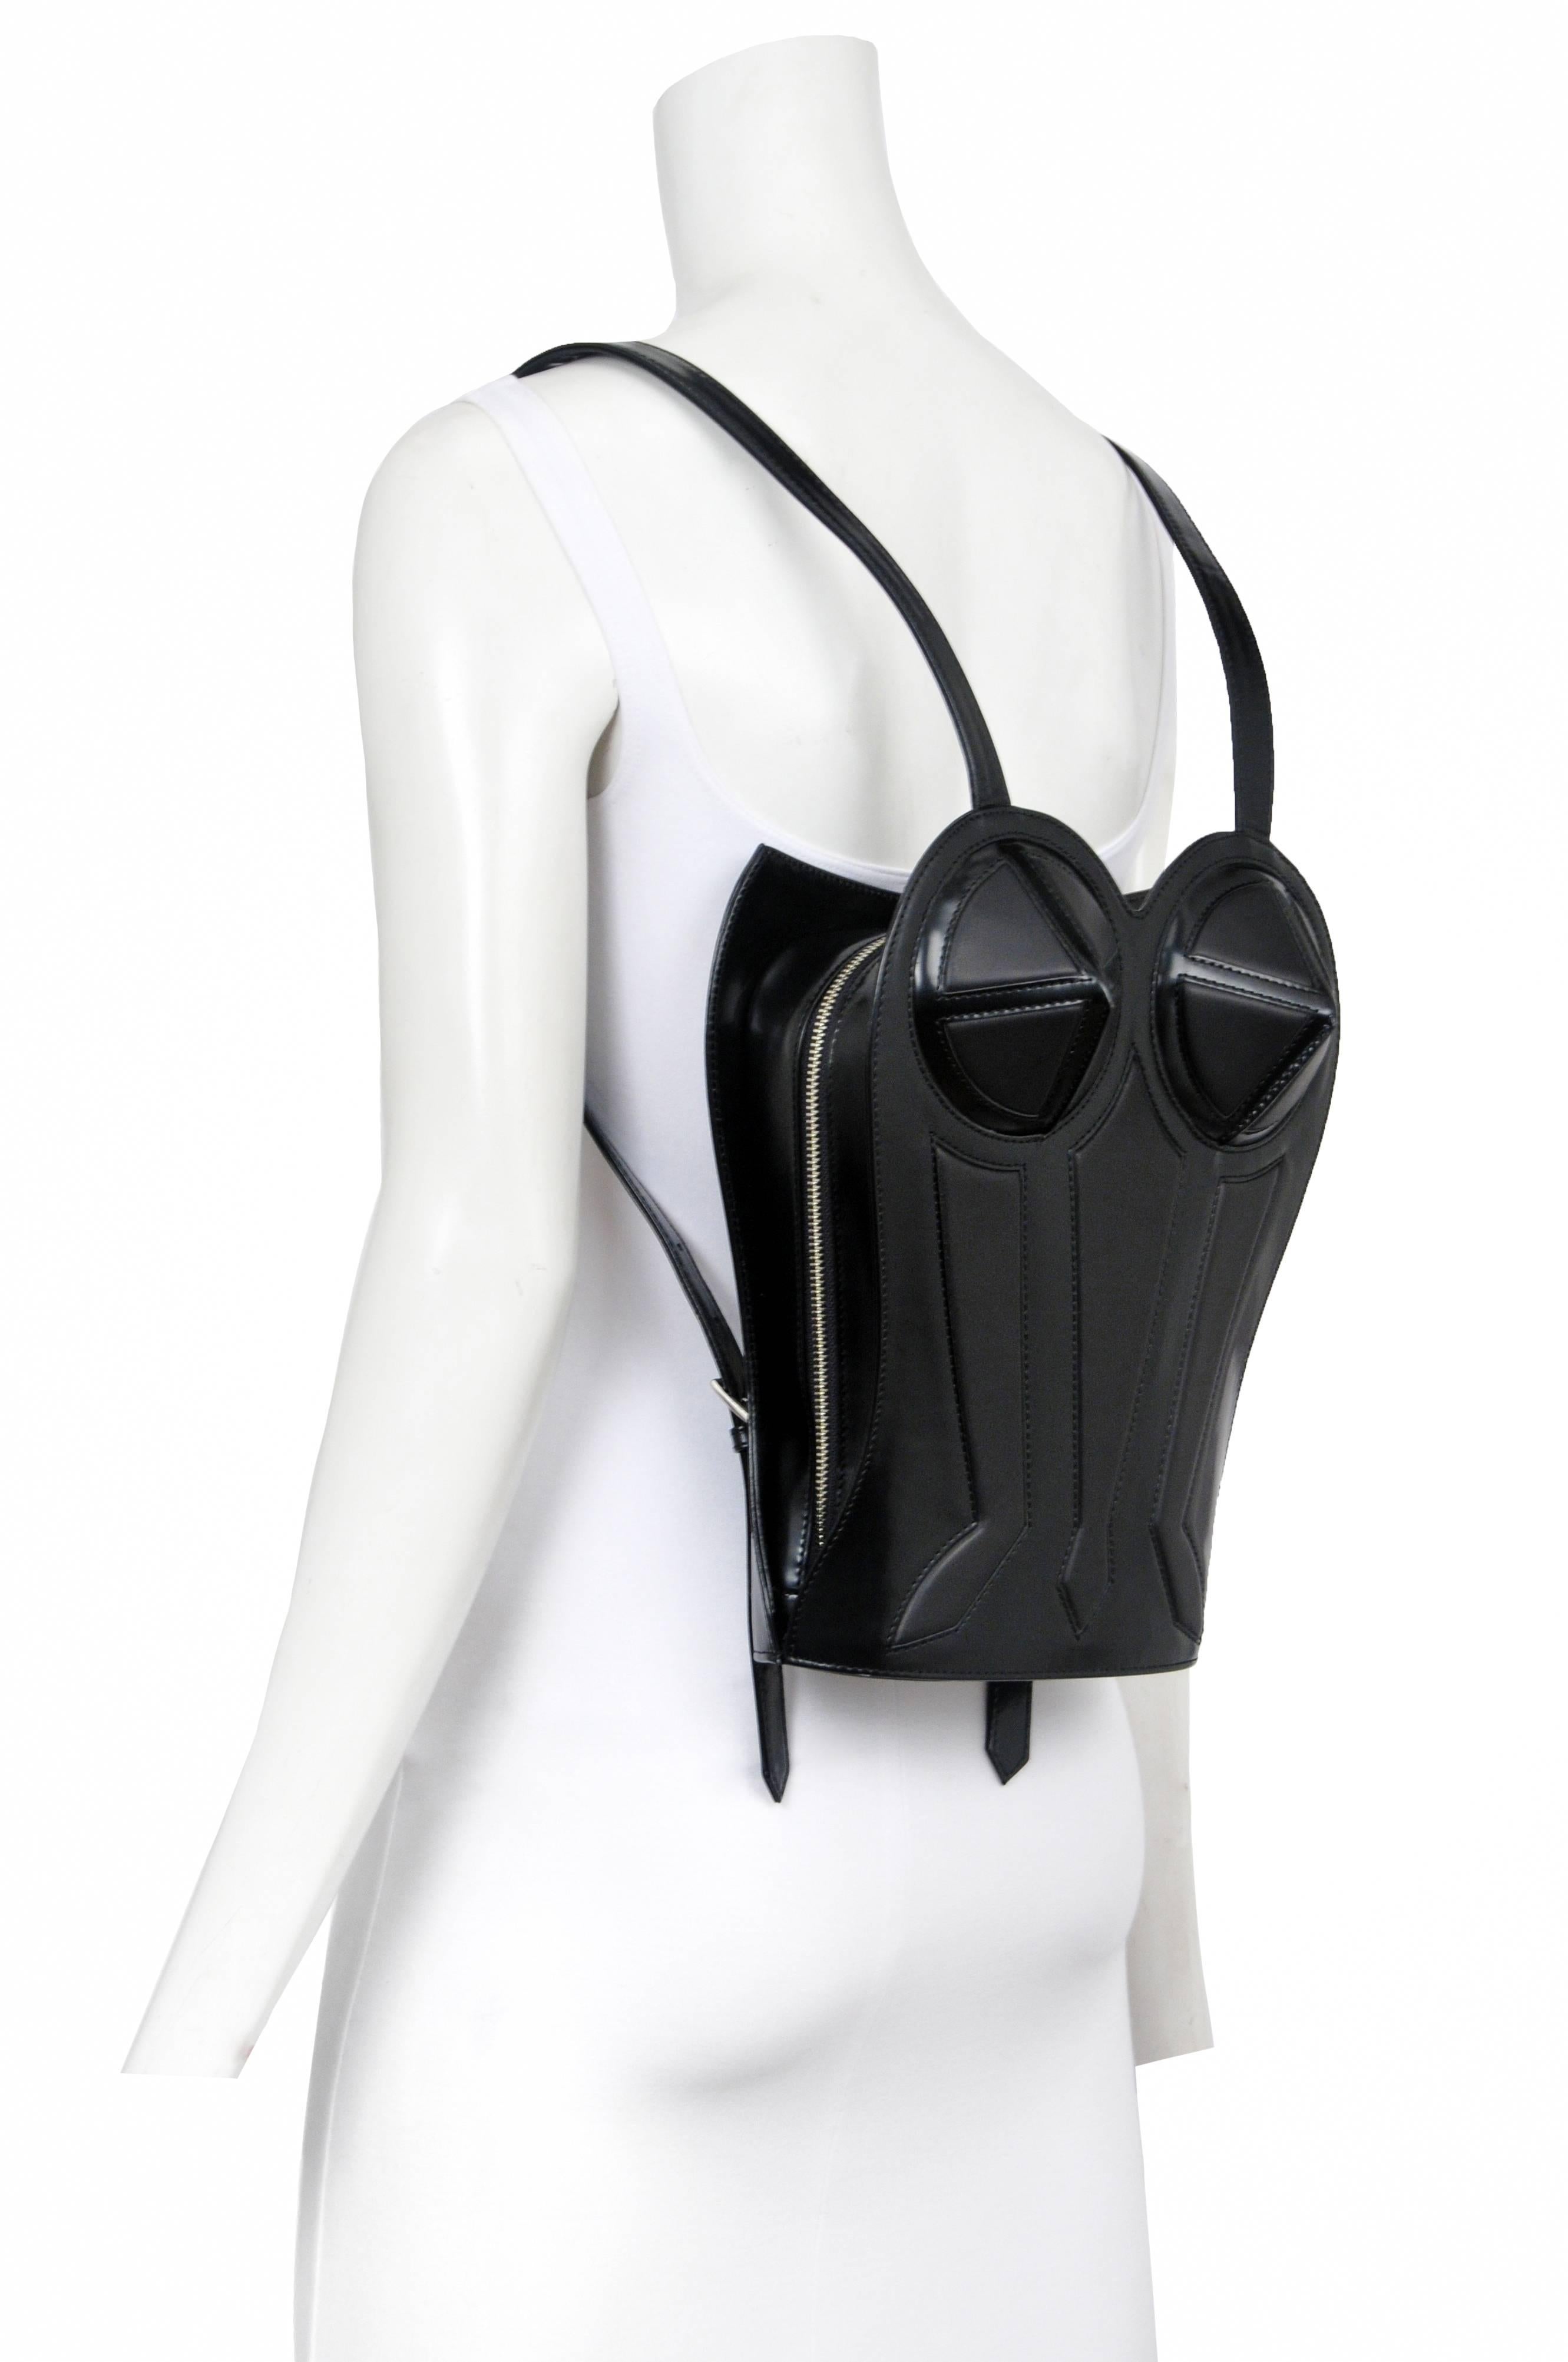 Vintage Jean Paul Gaultier black bustier backpack featuring a structured leather exterior with top stitching throughout and a fabric lined interior. Circa 1998.